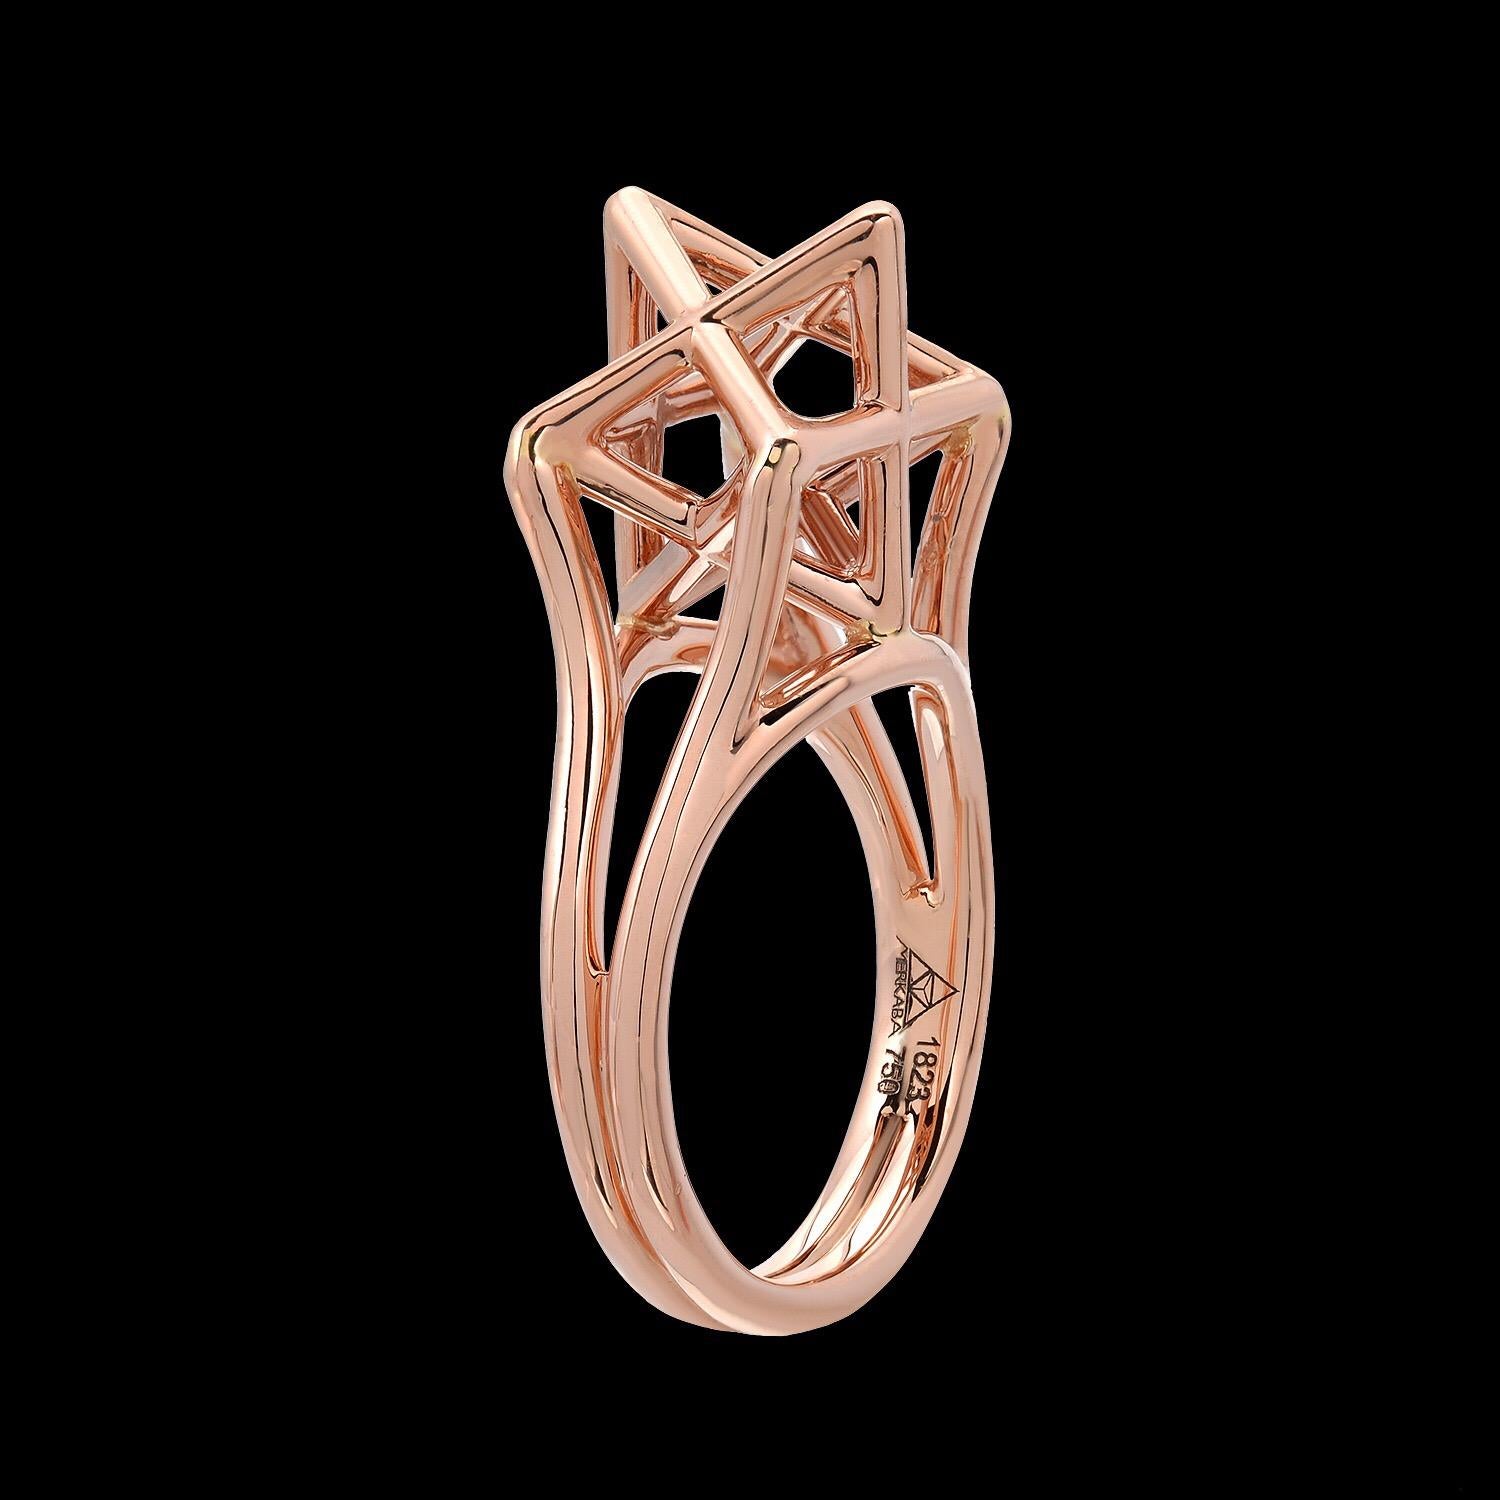 Merkaba three dimensional star tetrahedron, 18K rose gold ring, featuring a dramatic, sculptural design, extending upward from the hand 0.43”, a stunning three-dimensional symbol of universal light. 
Size 6. Resizing is complimentary upon